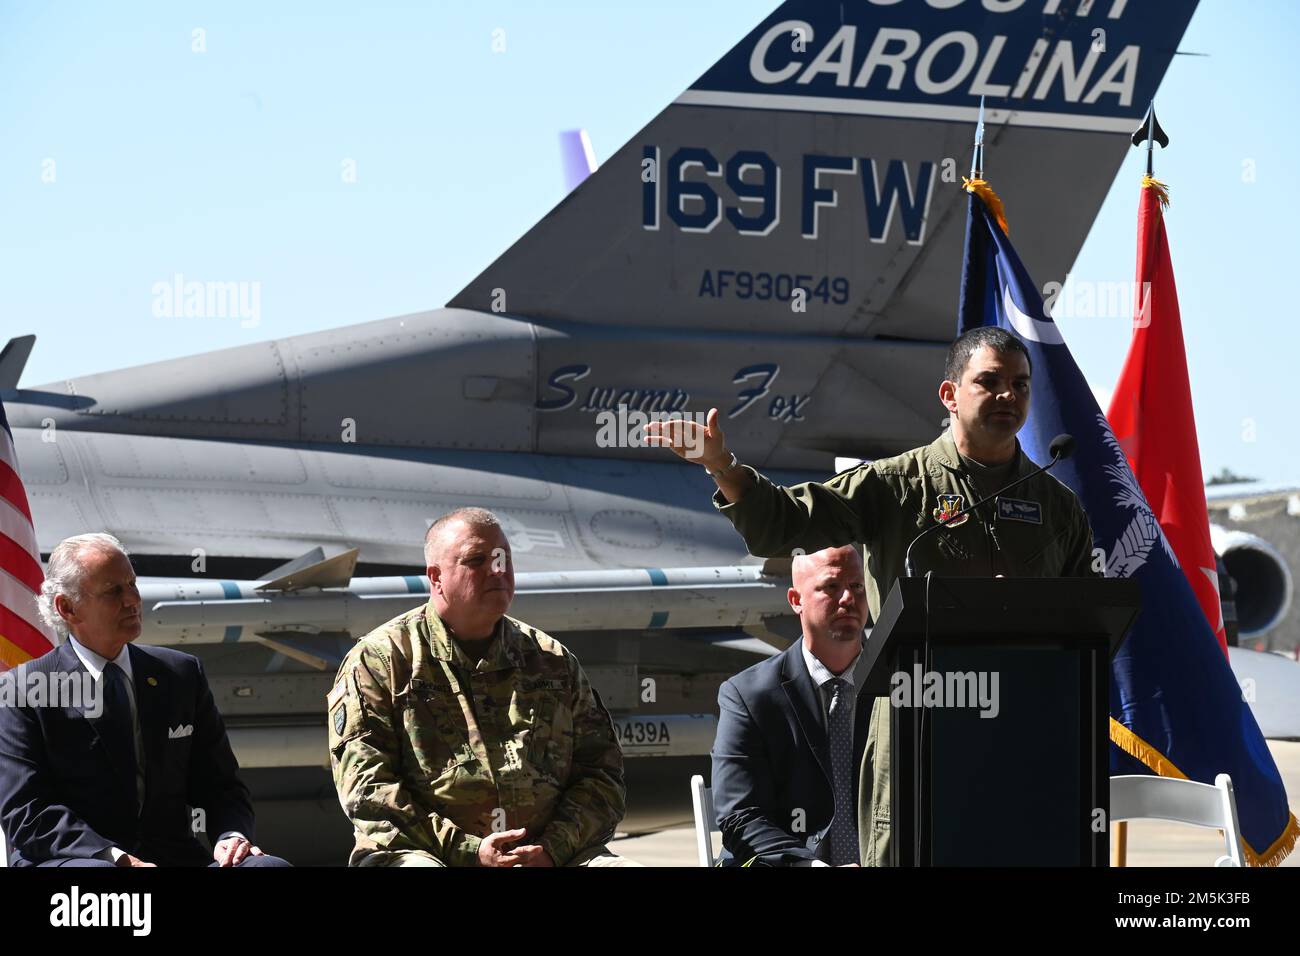 U.S. Air Force Col. Quaid Quadri, 169th Fighter Wing commander, speaks to local media and distinguished visitors at the Columbia Metropolitan Airport West Cargo Hangar, Columbia, South Carolina during a press conference, March 21, 2022. Columbia Metropolitan Airport hosts a press conference to announce a six-month temporary move of F-16 fighter jet flying operations from the the South Carolina Air National Guard's 169th Fighter Wing at nearby McEntire Joint National Guard Base to their airport. This joint partnership, regarding the temporary relocation of F-16 aircraft, will begin in April 202 Stock Photo